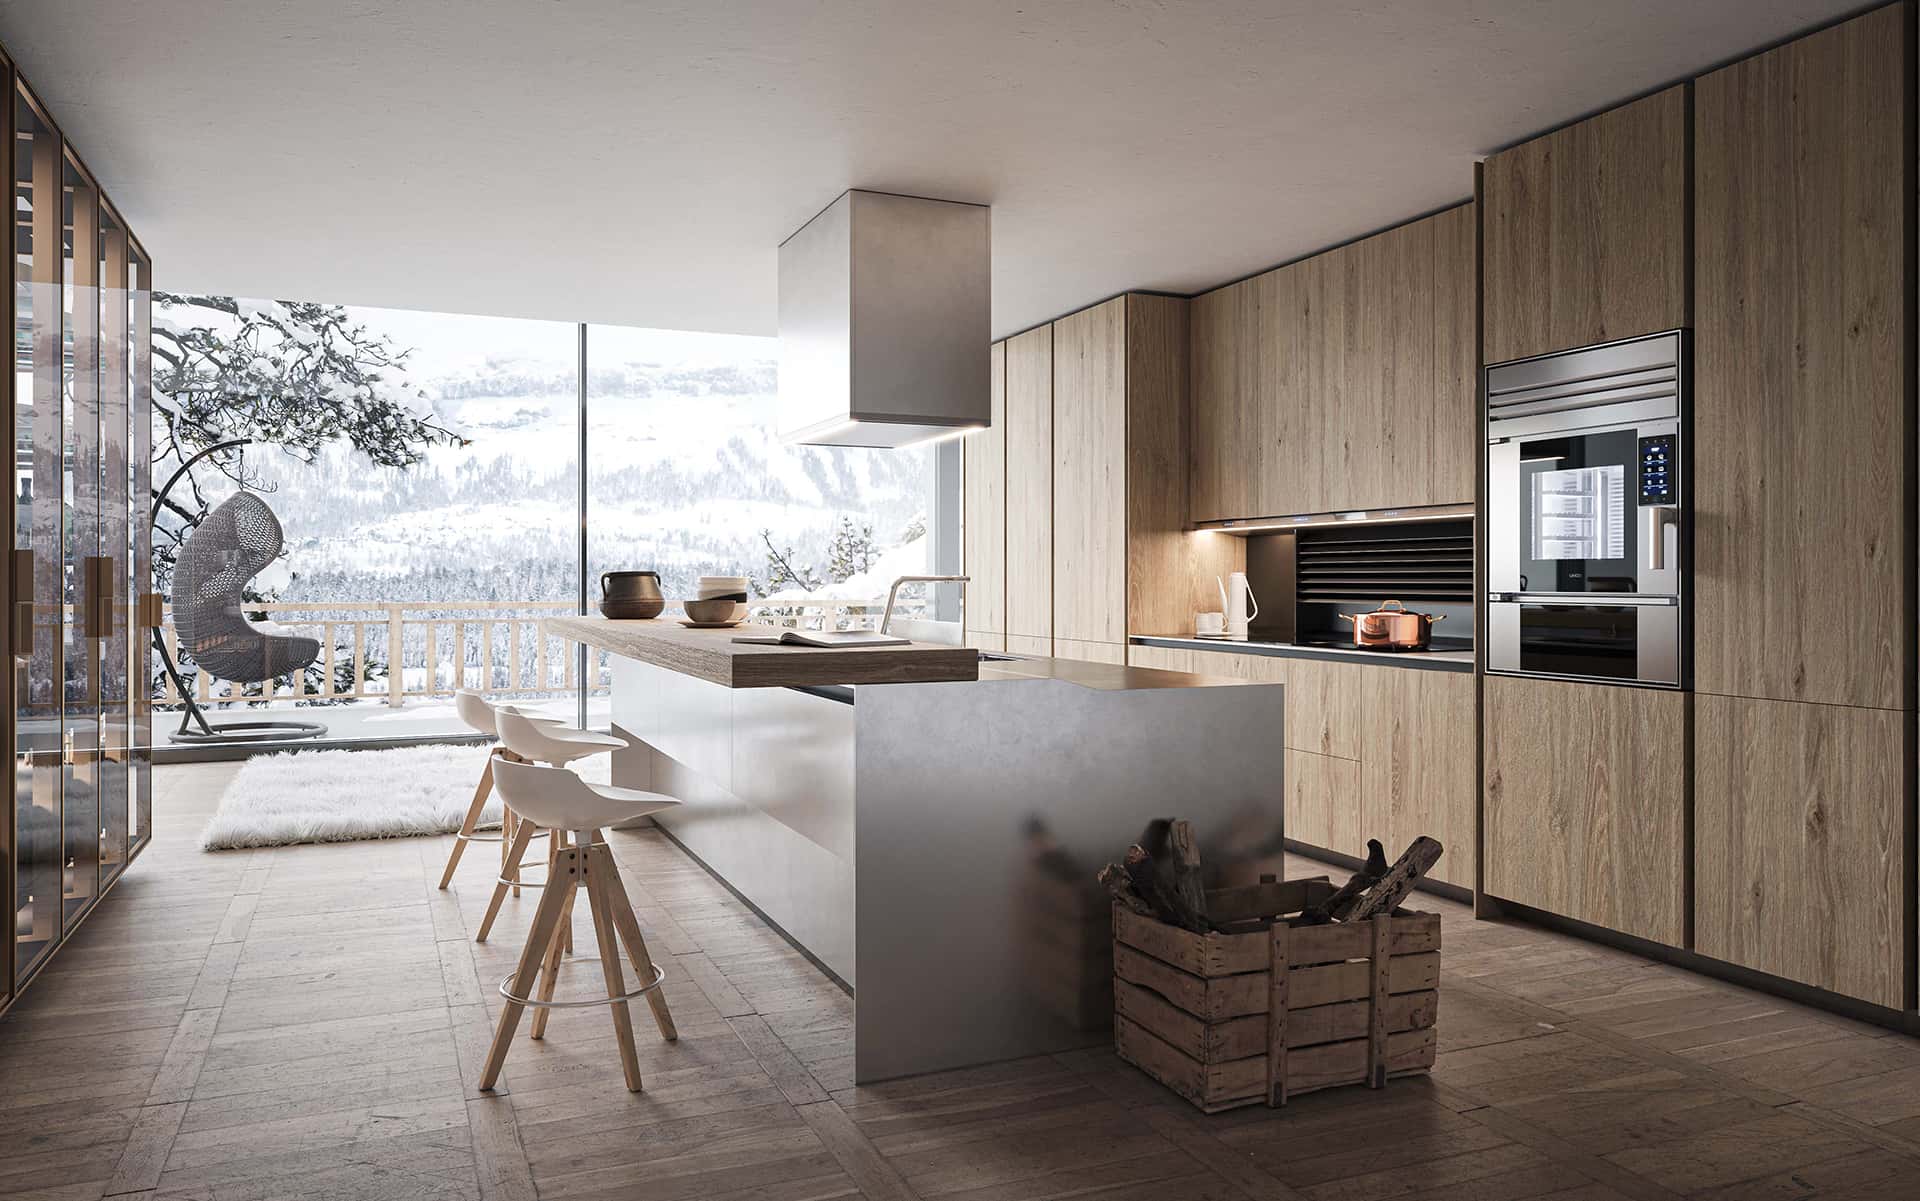 Unox Casa smart oven in a mountain chalet's luxury kitchen in Cortina D'Ampezzo